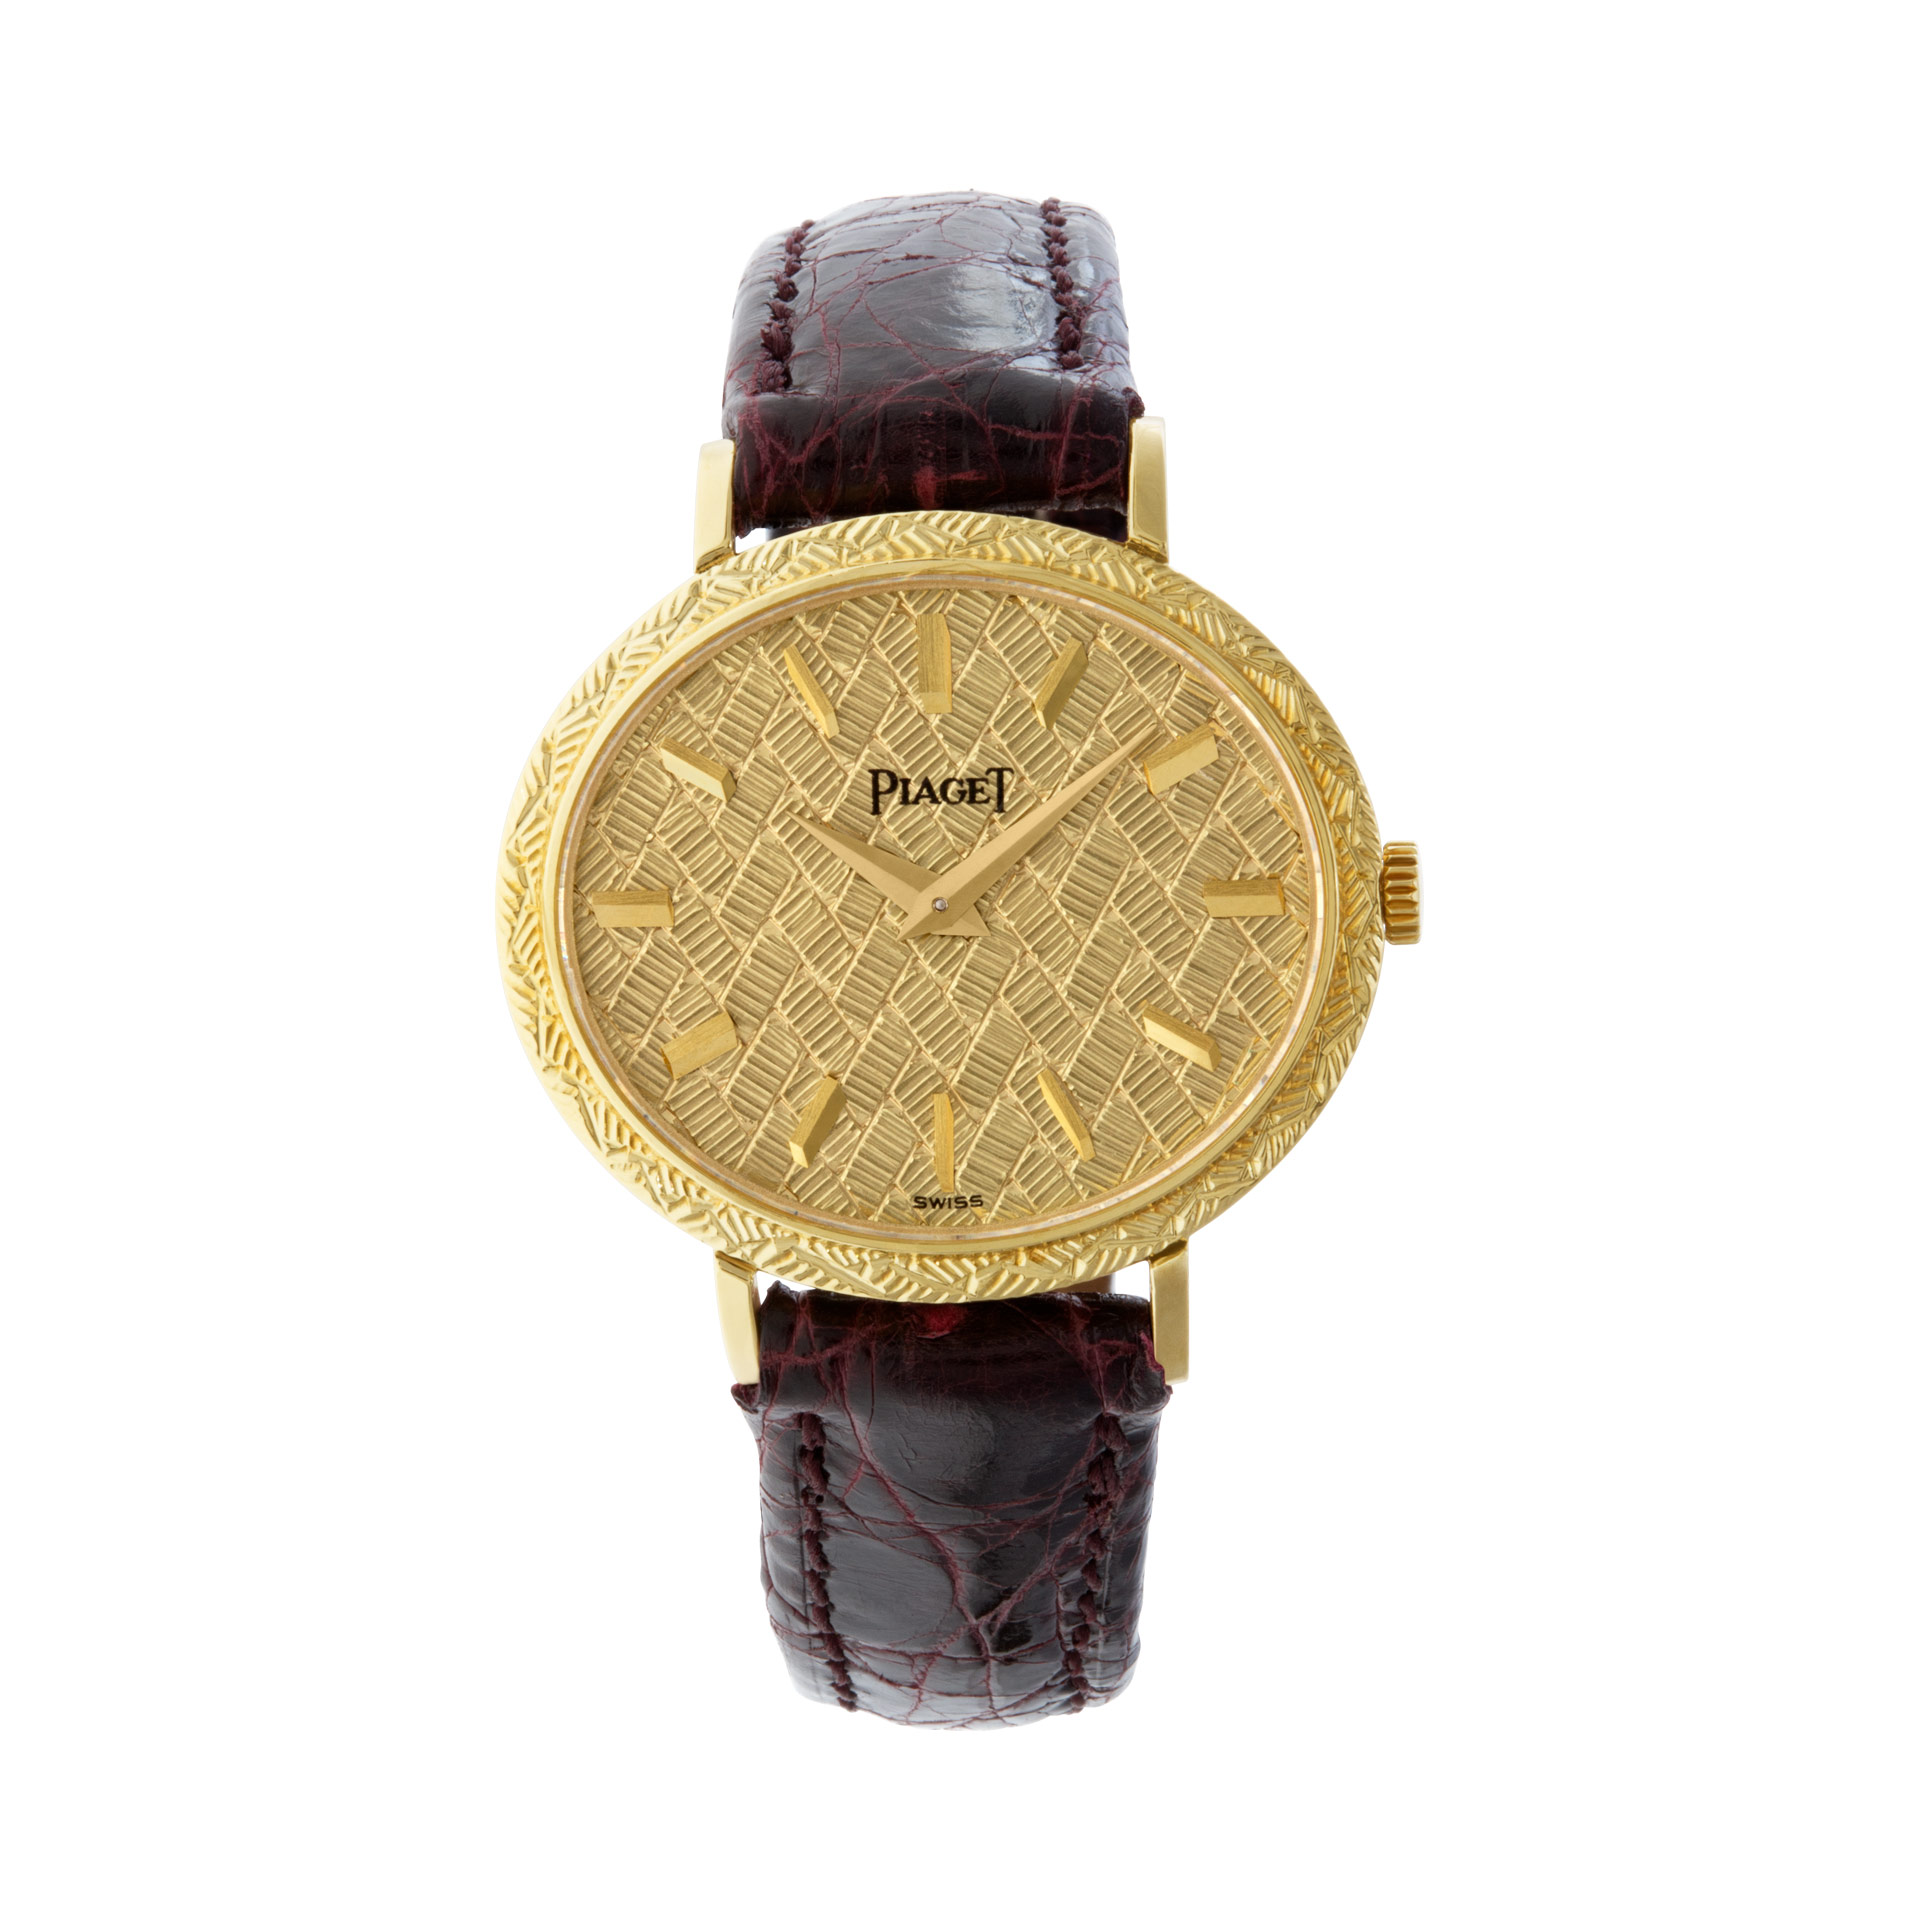 Piaget Classic 27mm 9801 image 1